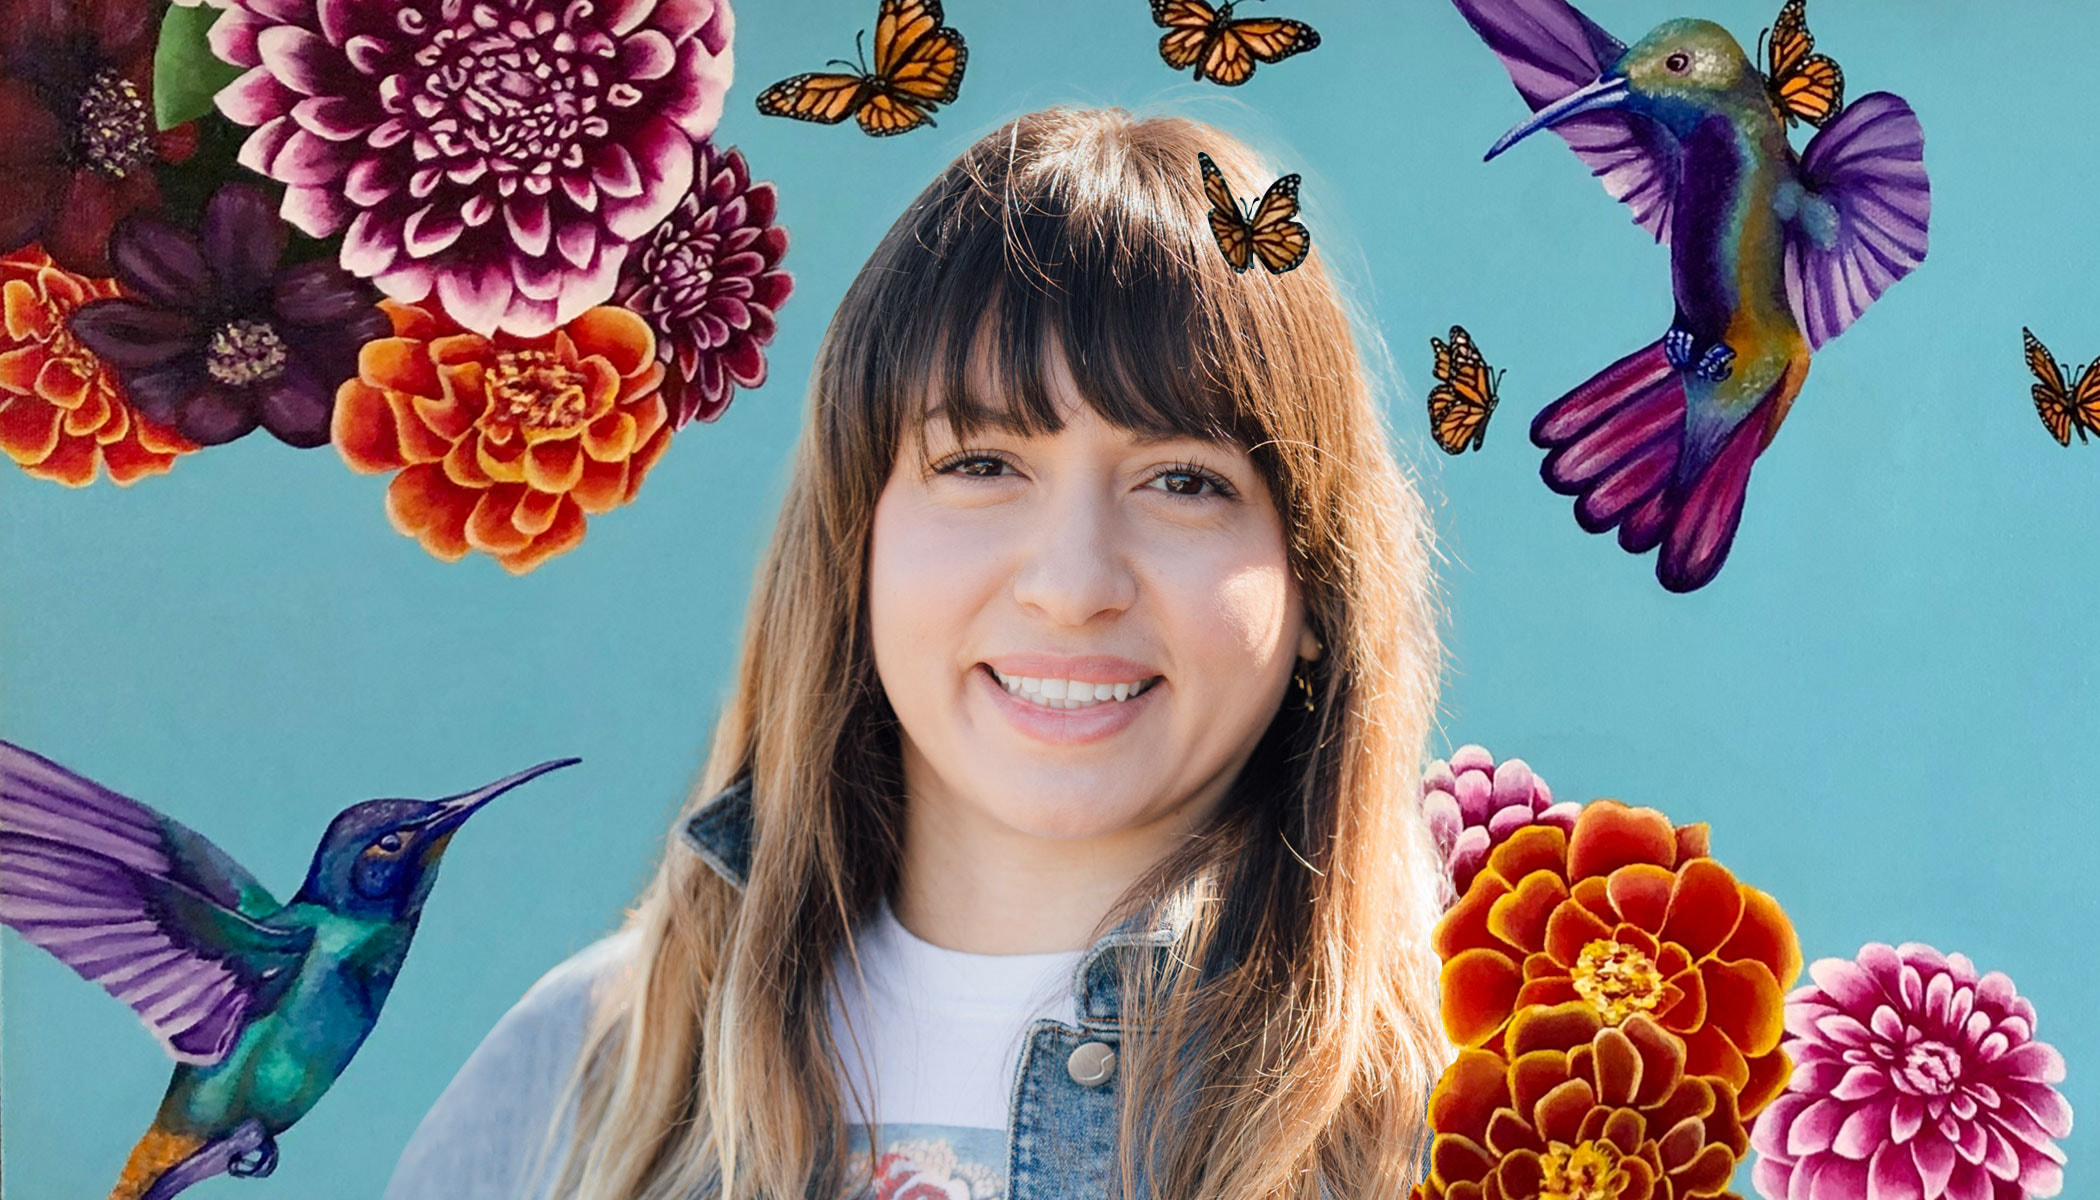 Sandra Moreno, CZI’s science program executive assistant, smiles in a headshot. She is surrounded by images from her original artwork — pink and orange flowers, hummingbirds and butterflies.